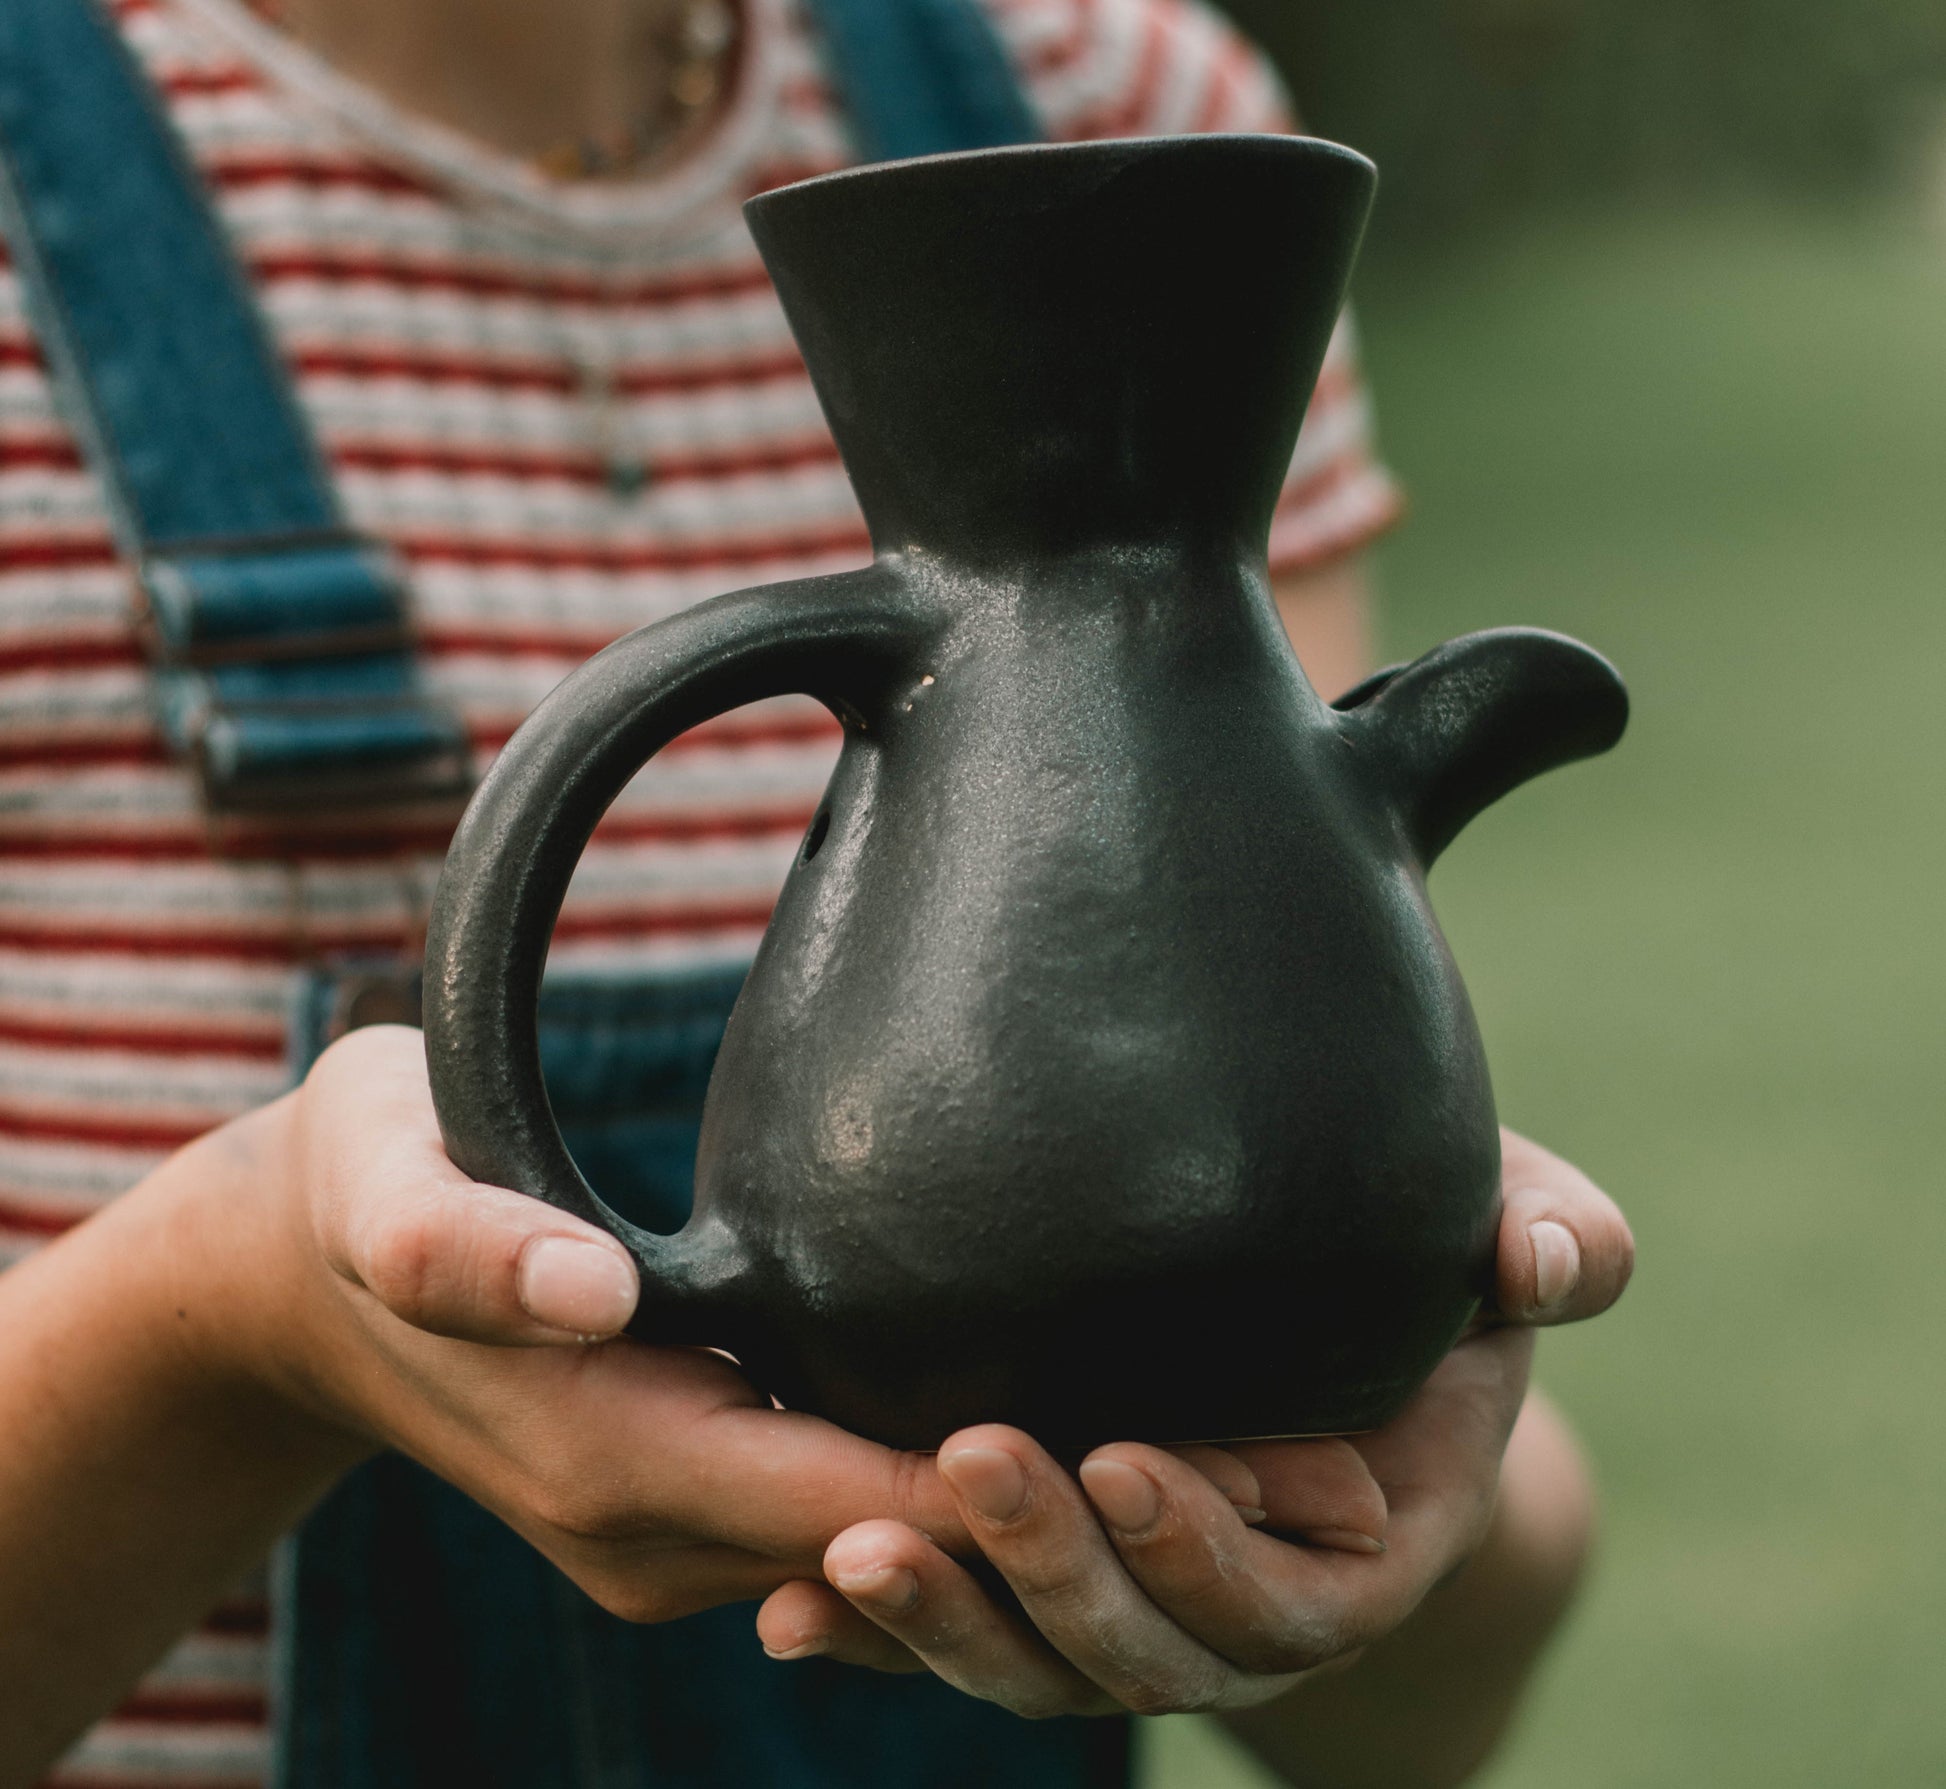 "The Kápi Coffee Maker, a handcrafted clay pot from Costa Rica, with a matte black finish. Its elegant, simple design features a flared top, sturdy handle, and a distinctive oxygenation hole for enhancing the coffee's flavor. The artisanal craftsmanship is evident in the pot's textured surface and organic shape, embodying a blend of tradition and functionality in its compact form."